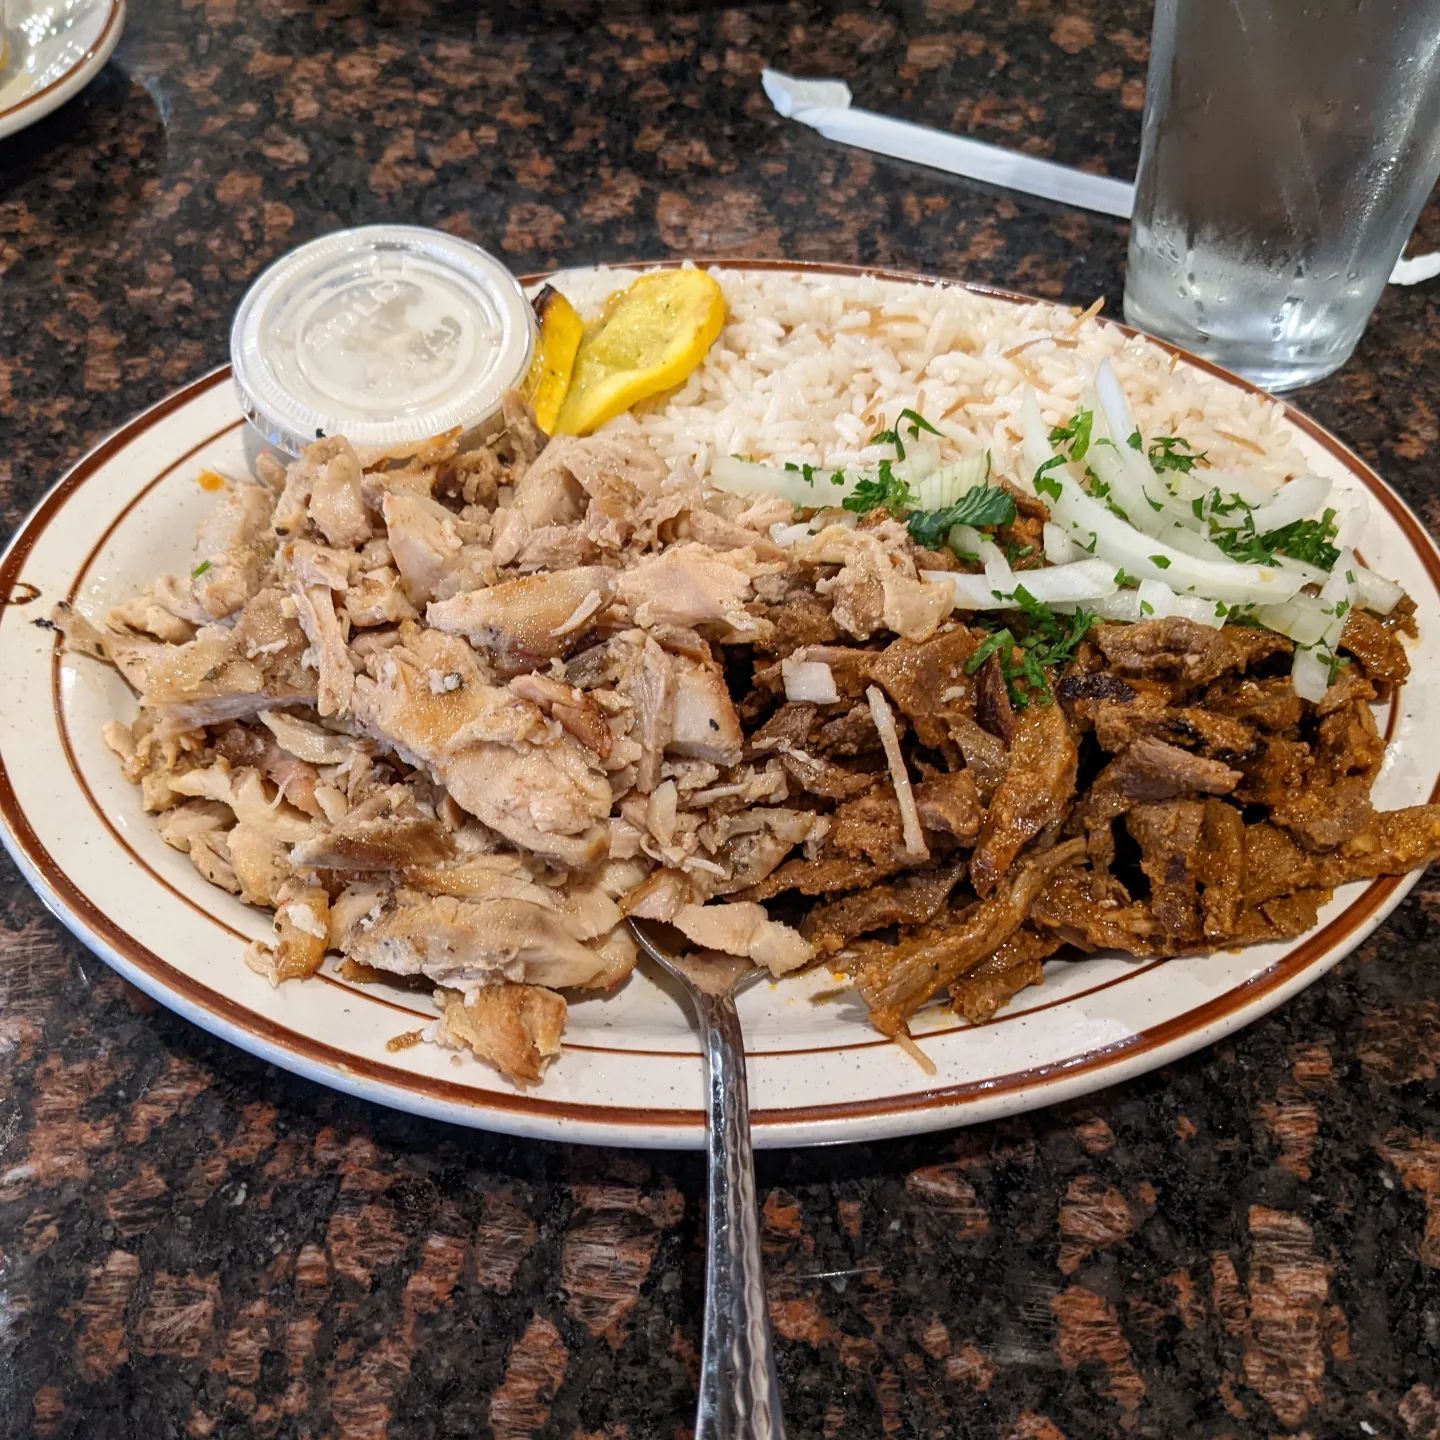 Alright I'll admit the Shawarma Combo had a lot more food than I was anticipating... But it is delicious!!! #foodporn